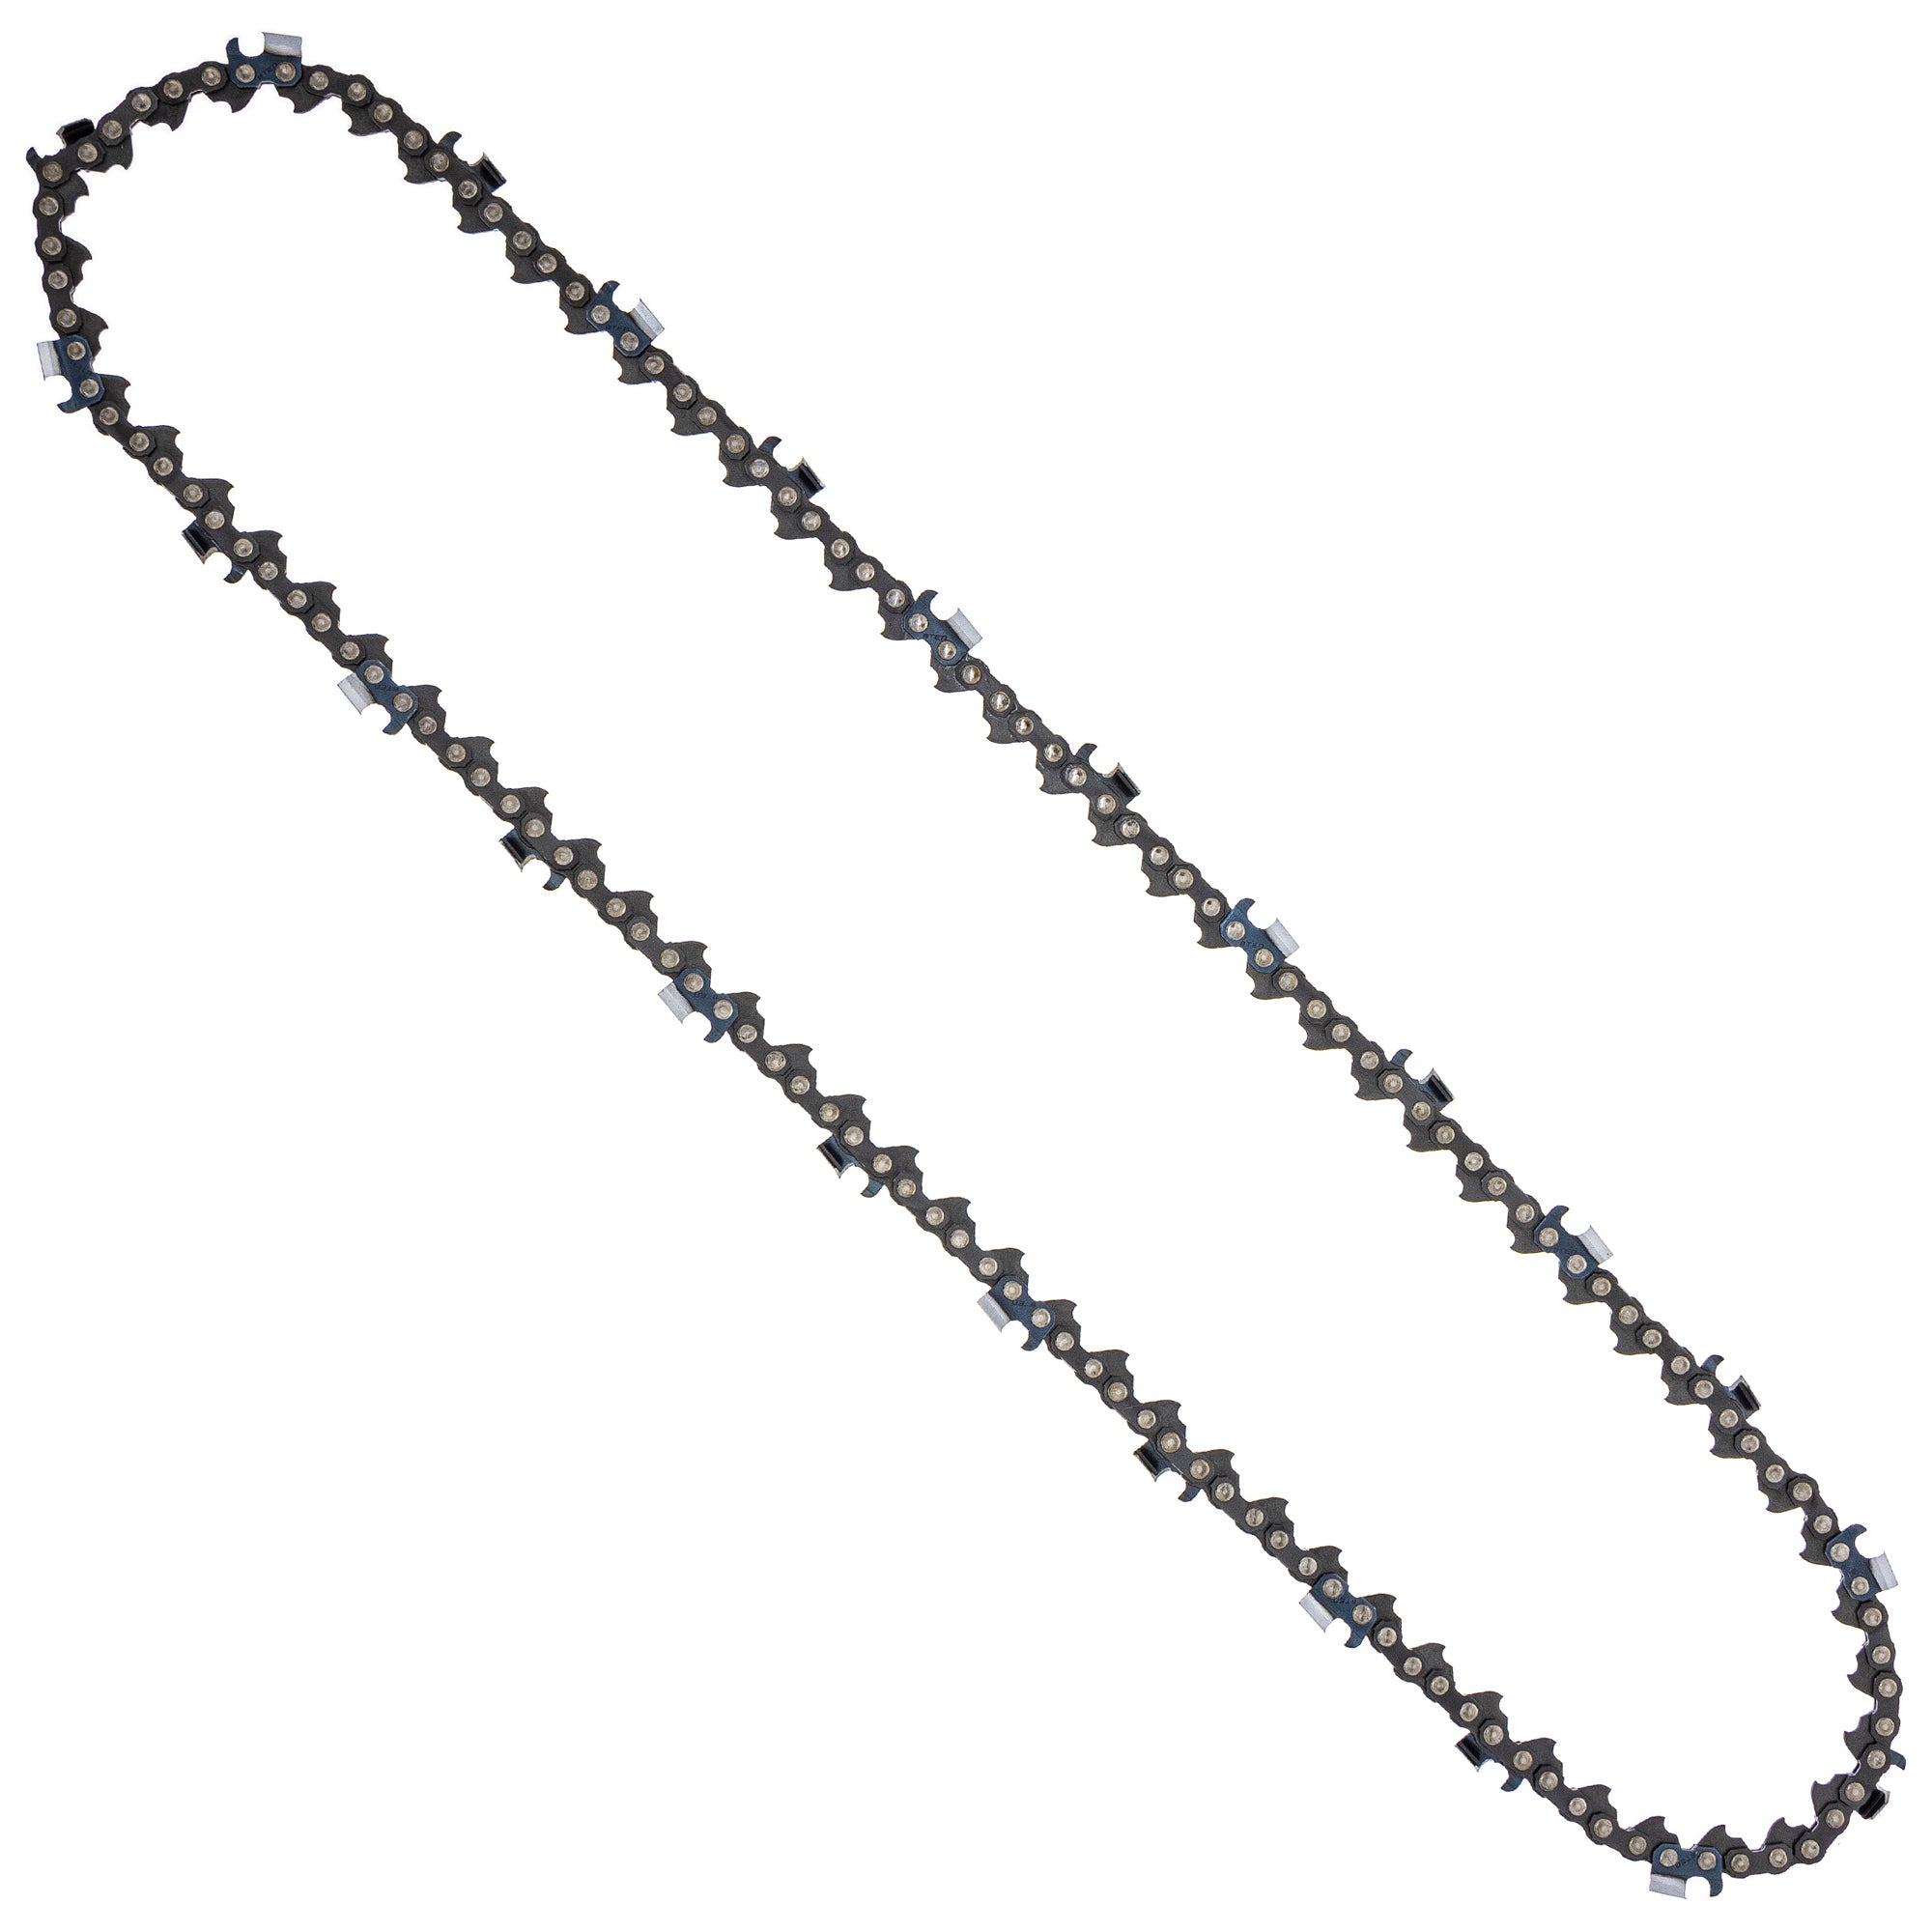 8TEN 810-CCC2290H Chain 6-Pack for zOTHER Oregon Husqvarna Poulan